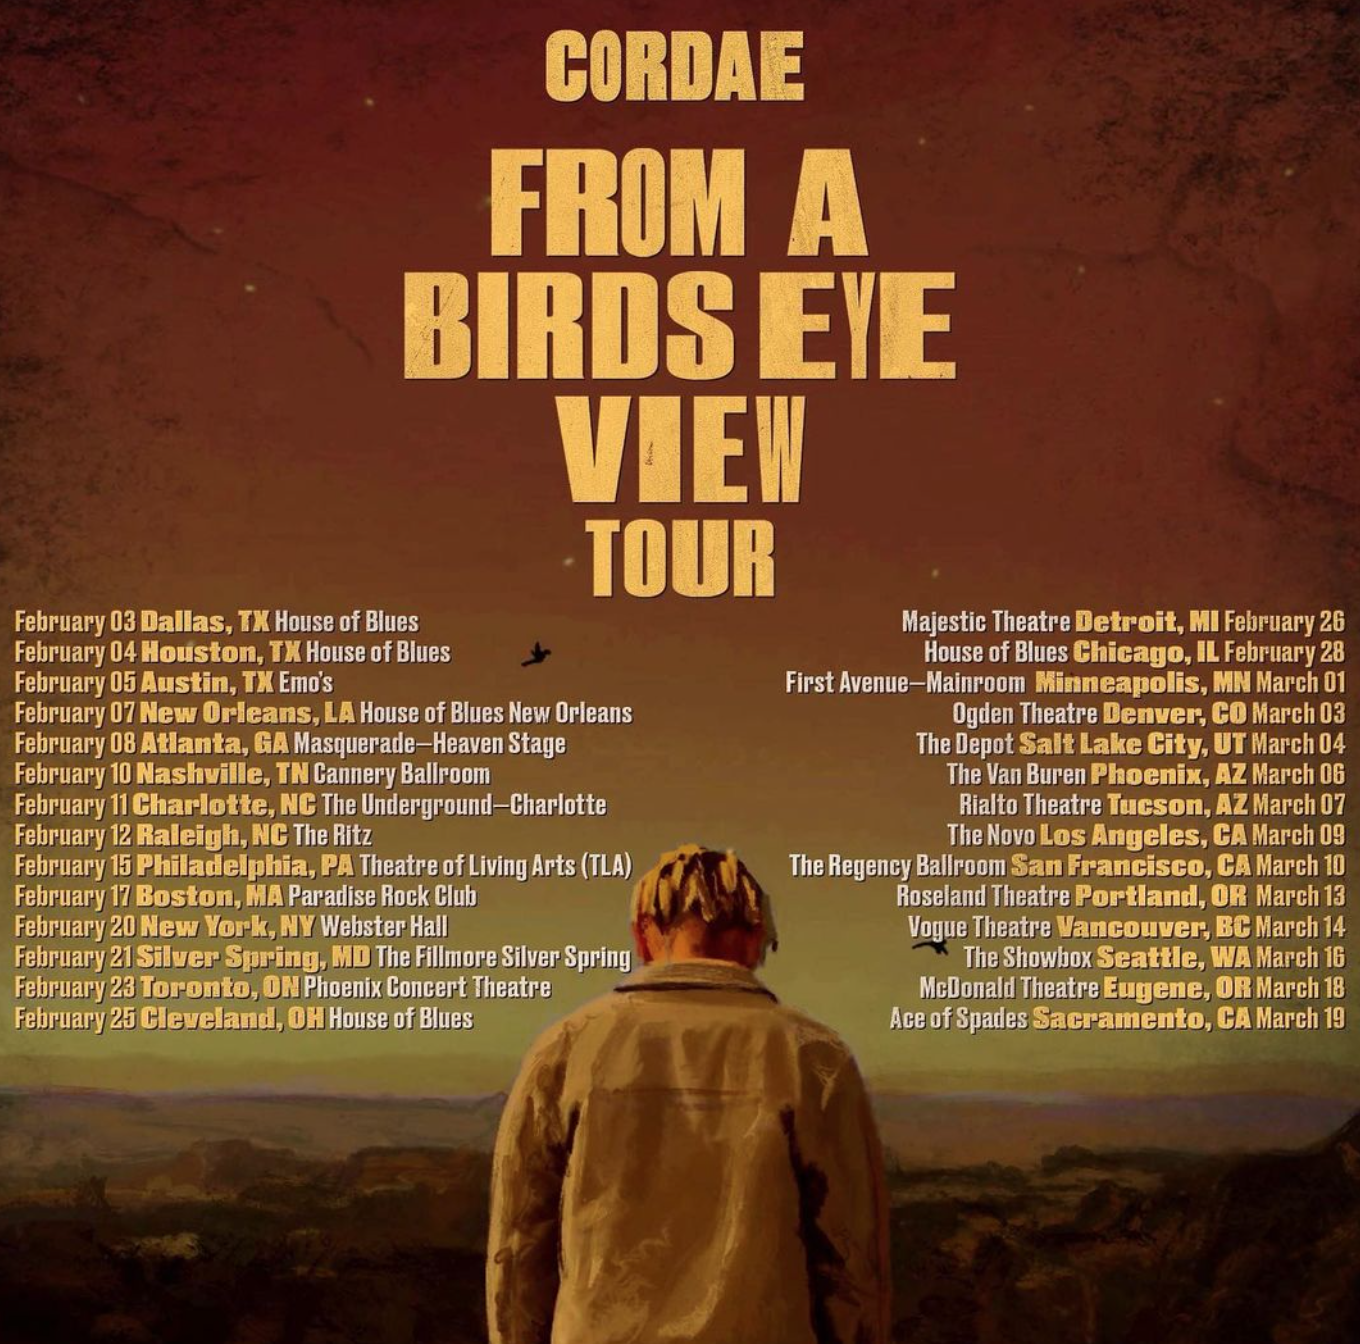 A poster for the Cordae tour is pictured